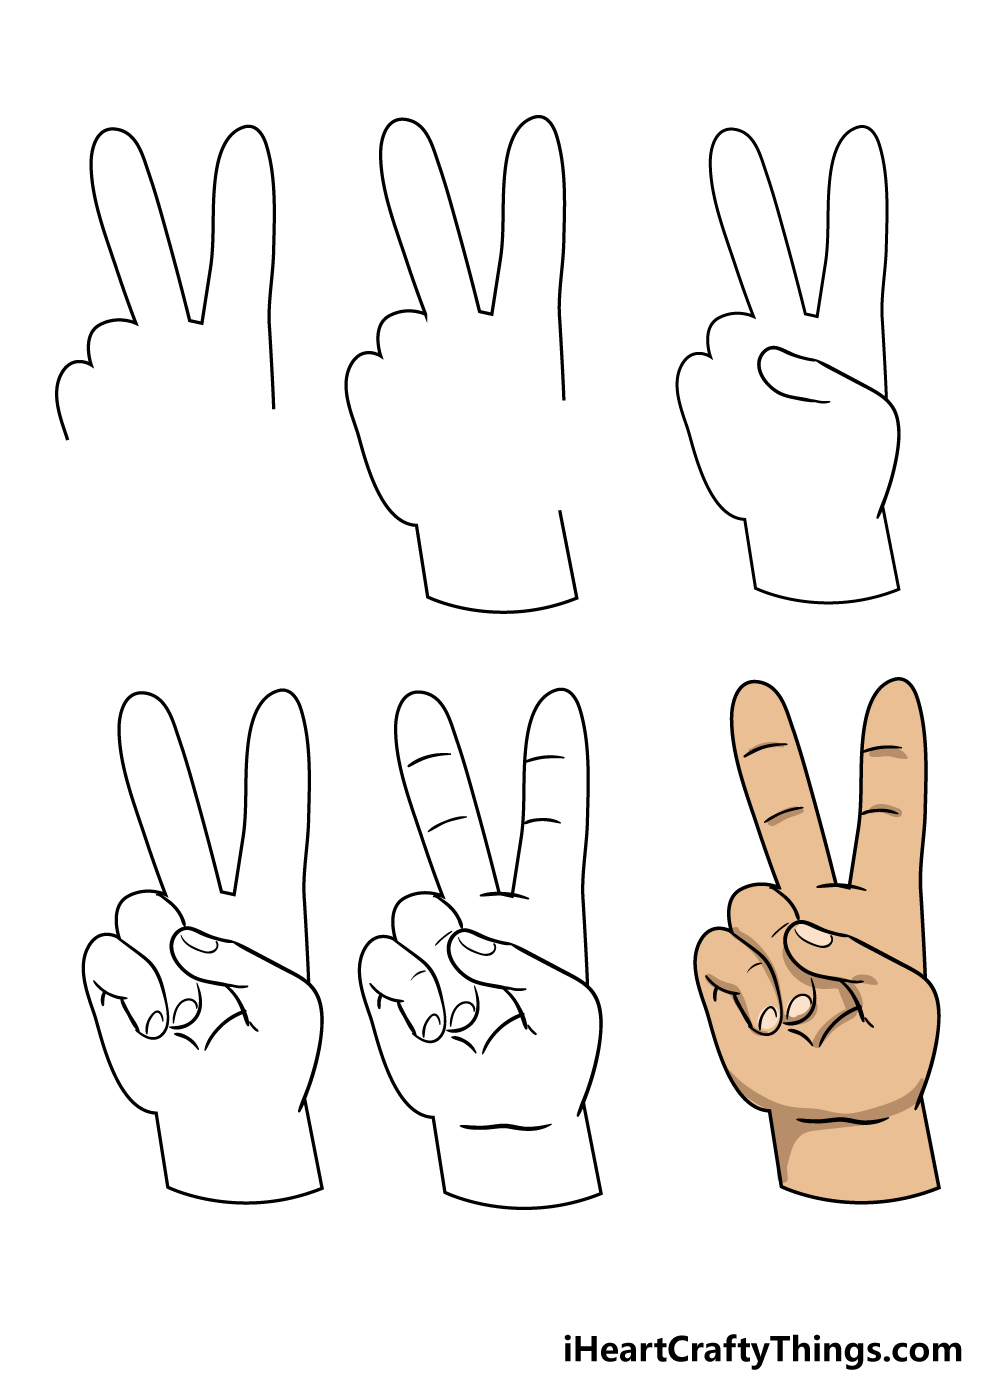 how to draw peace sign in 6 steps